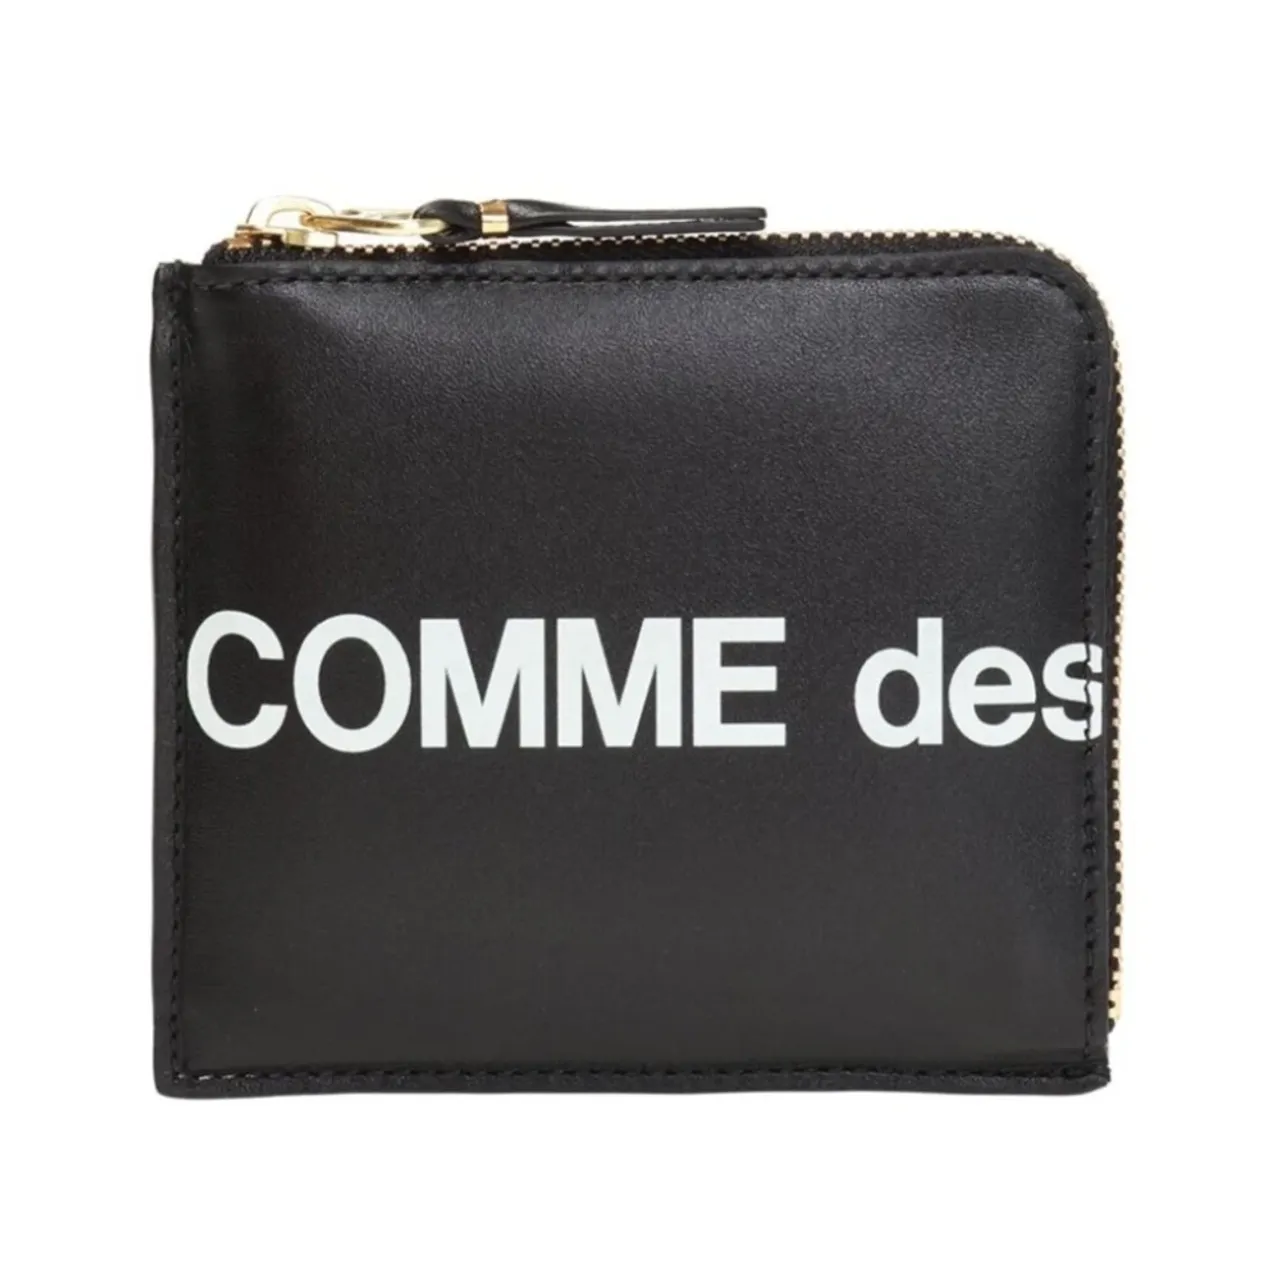 Comme des Garçons , Logo-printed Wallet with Zip Fastening ,Black female, Sizes: ONE SIZE